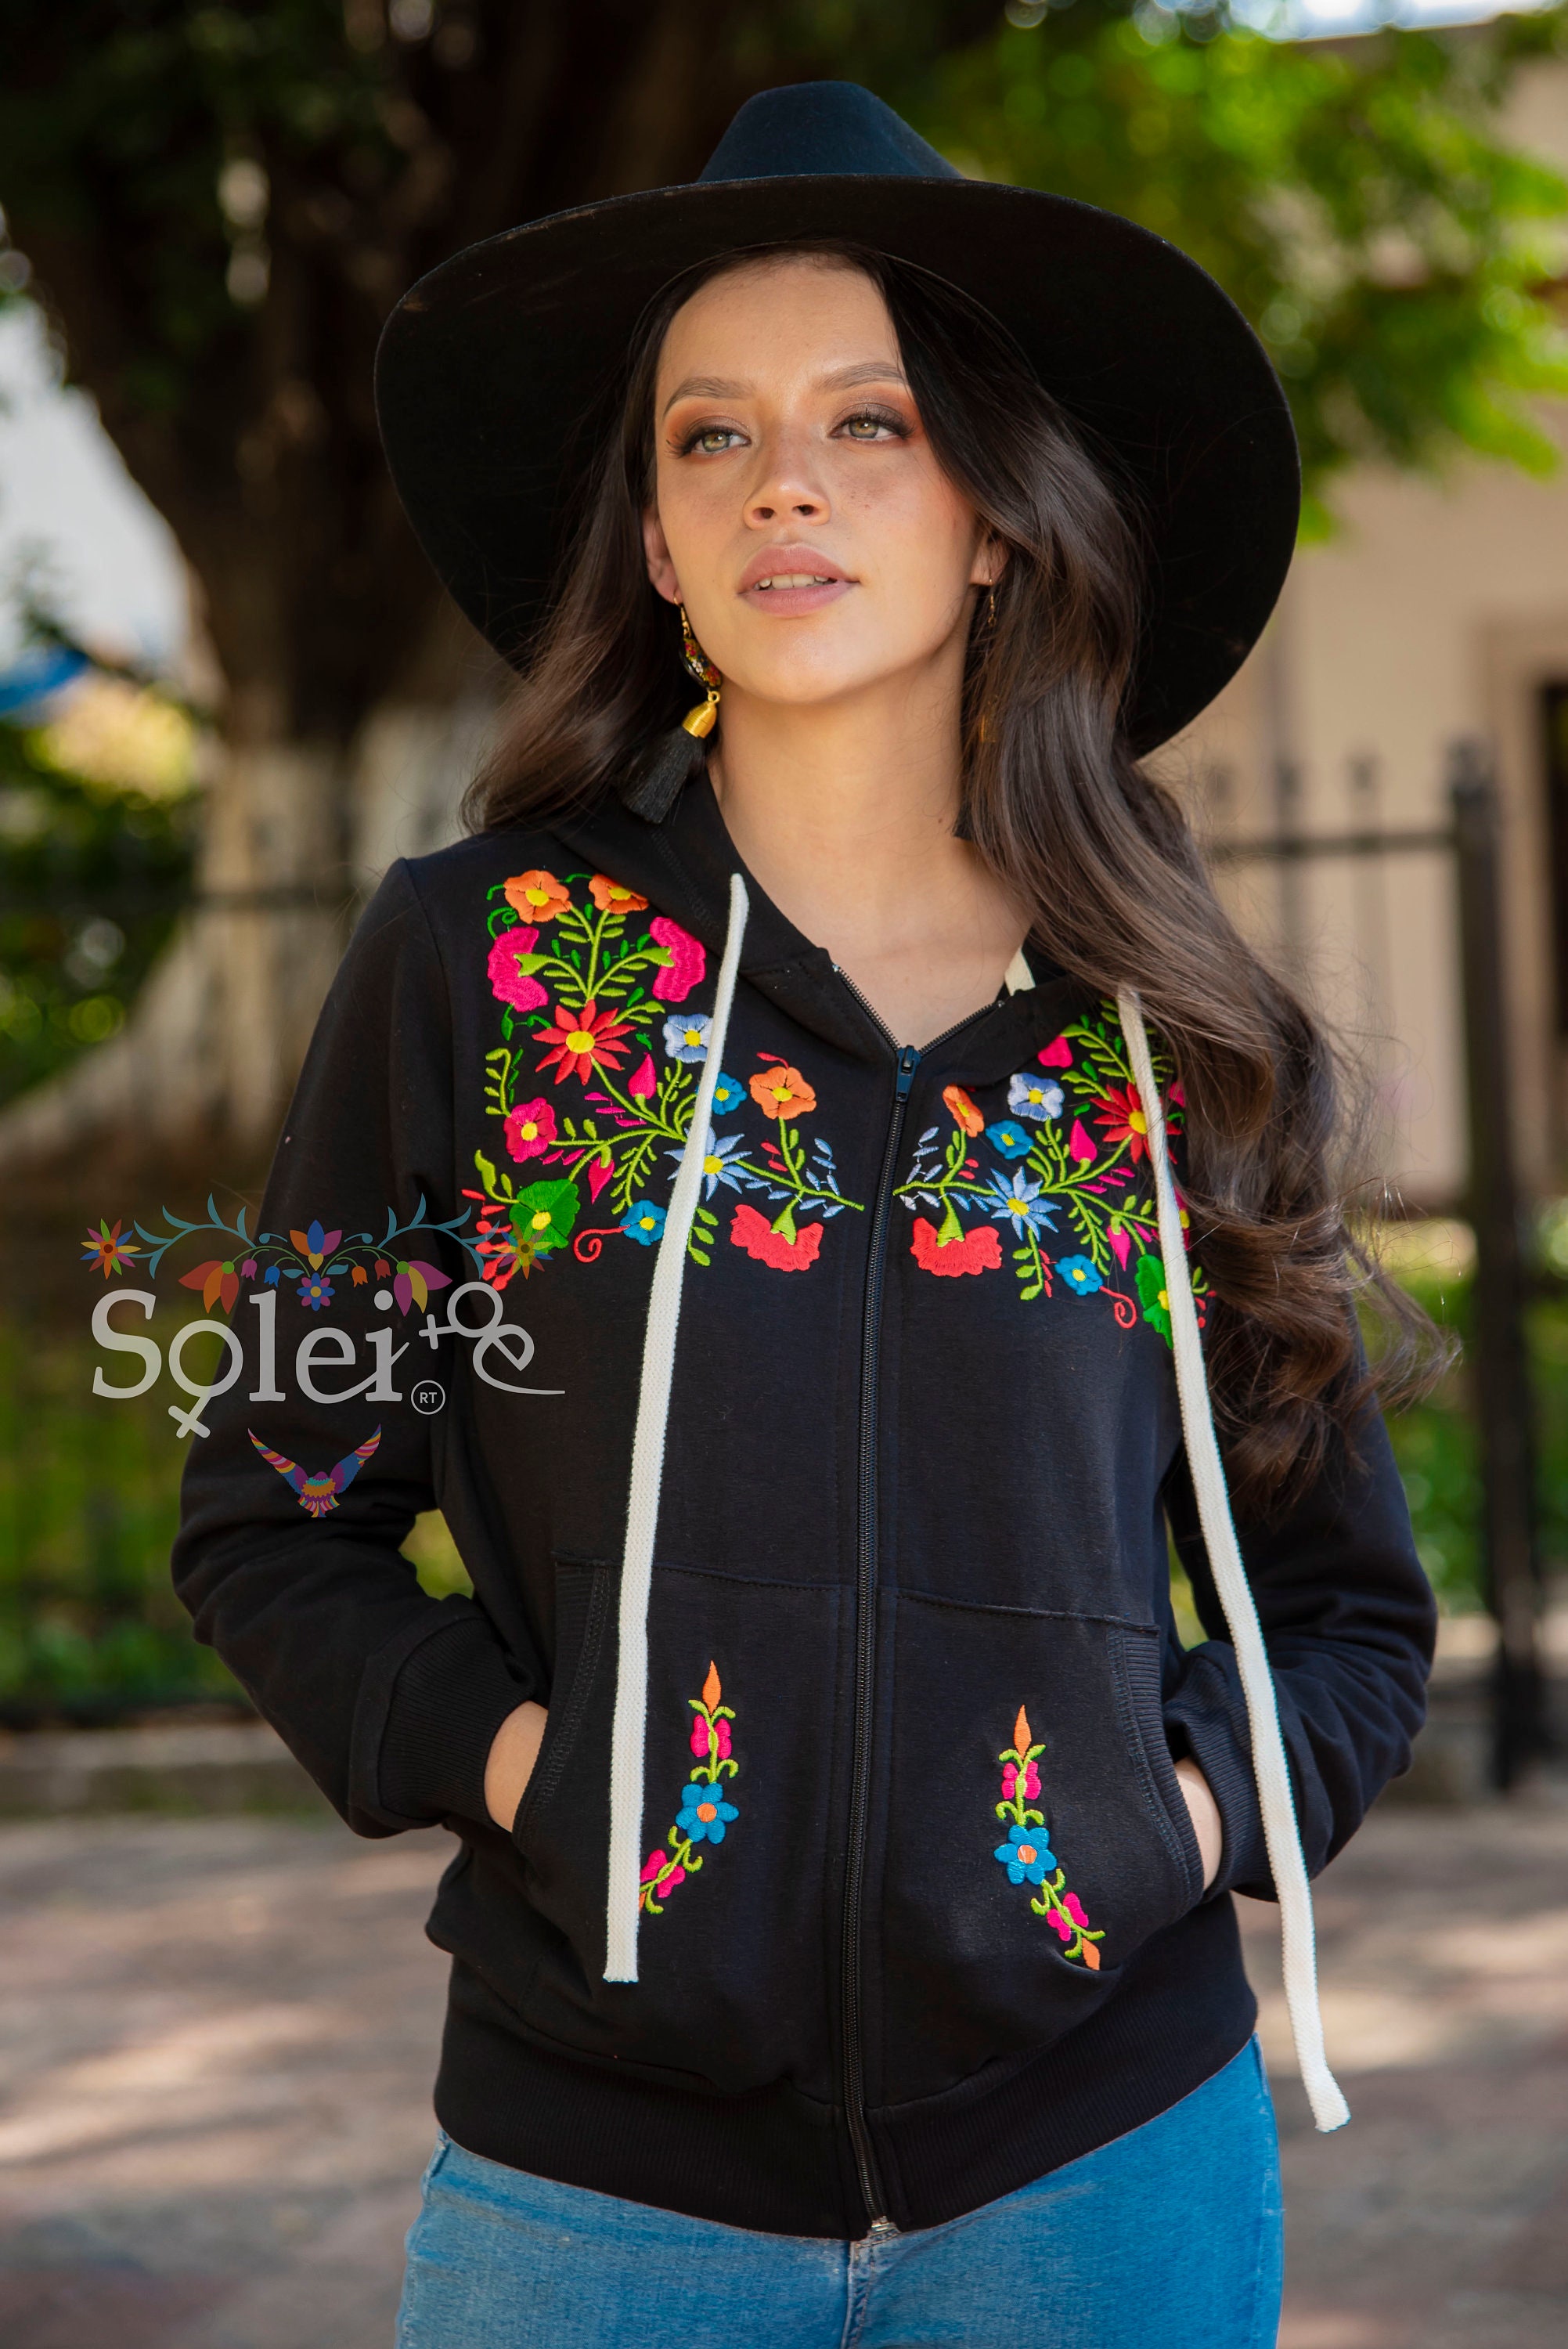 SoleiEthnic Mexican Floral Embroidered Jeans Jacket. Mexican Artisanal Denim Jacket. Embroidered Jeans Jacket. Mexican Jacket.